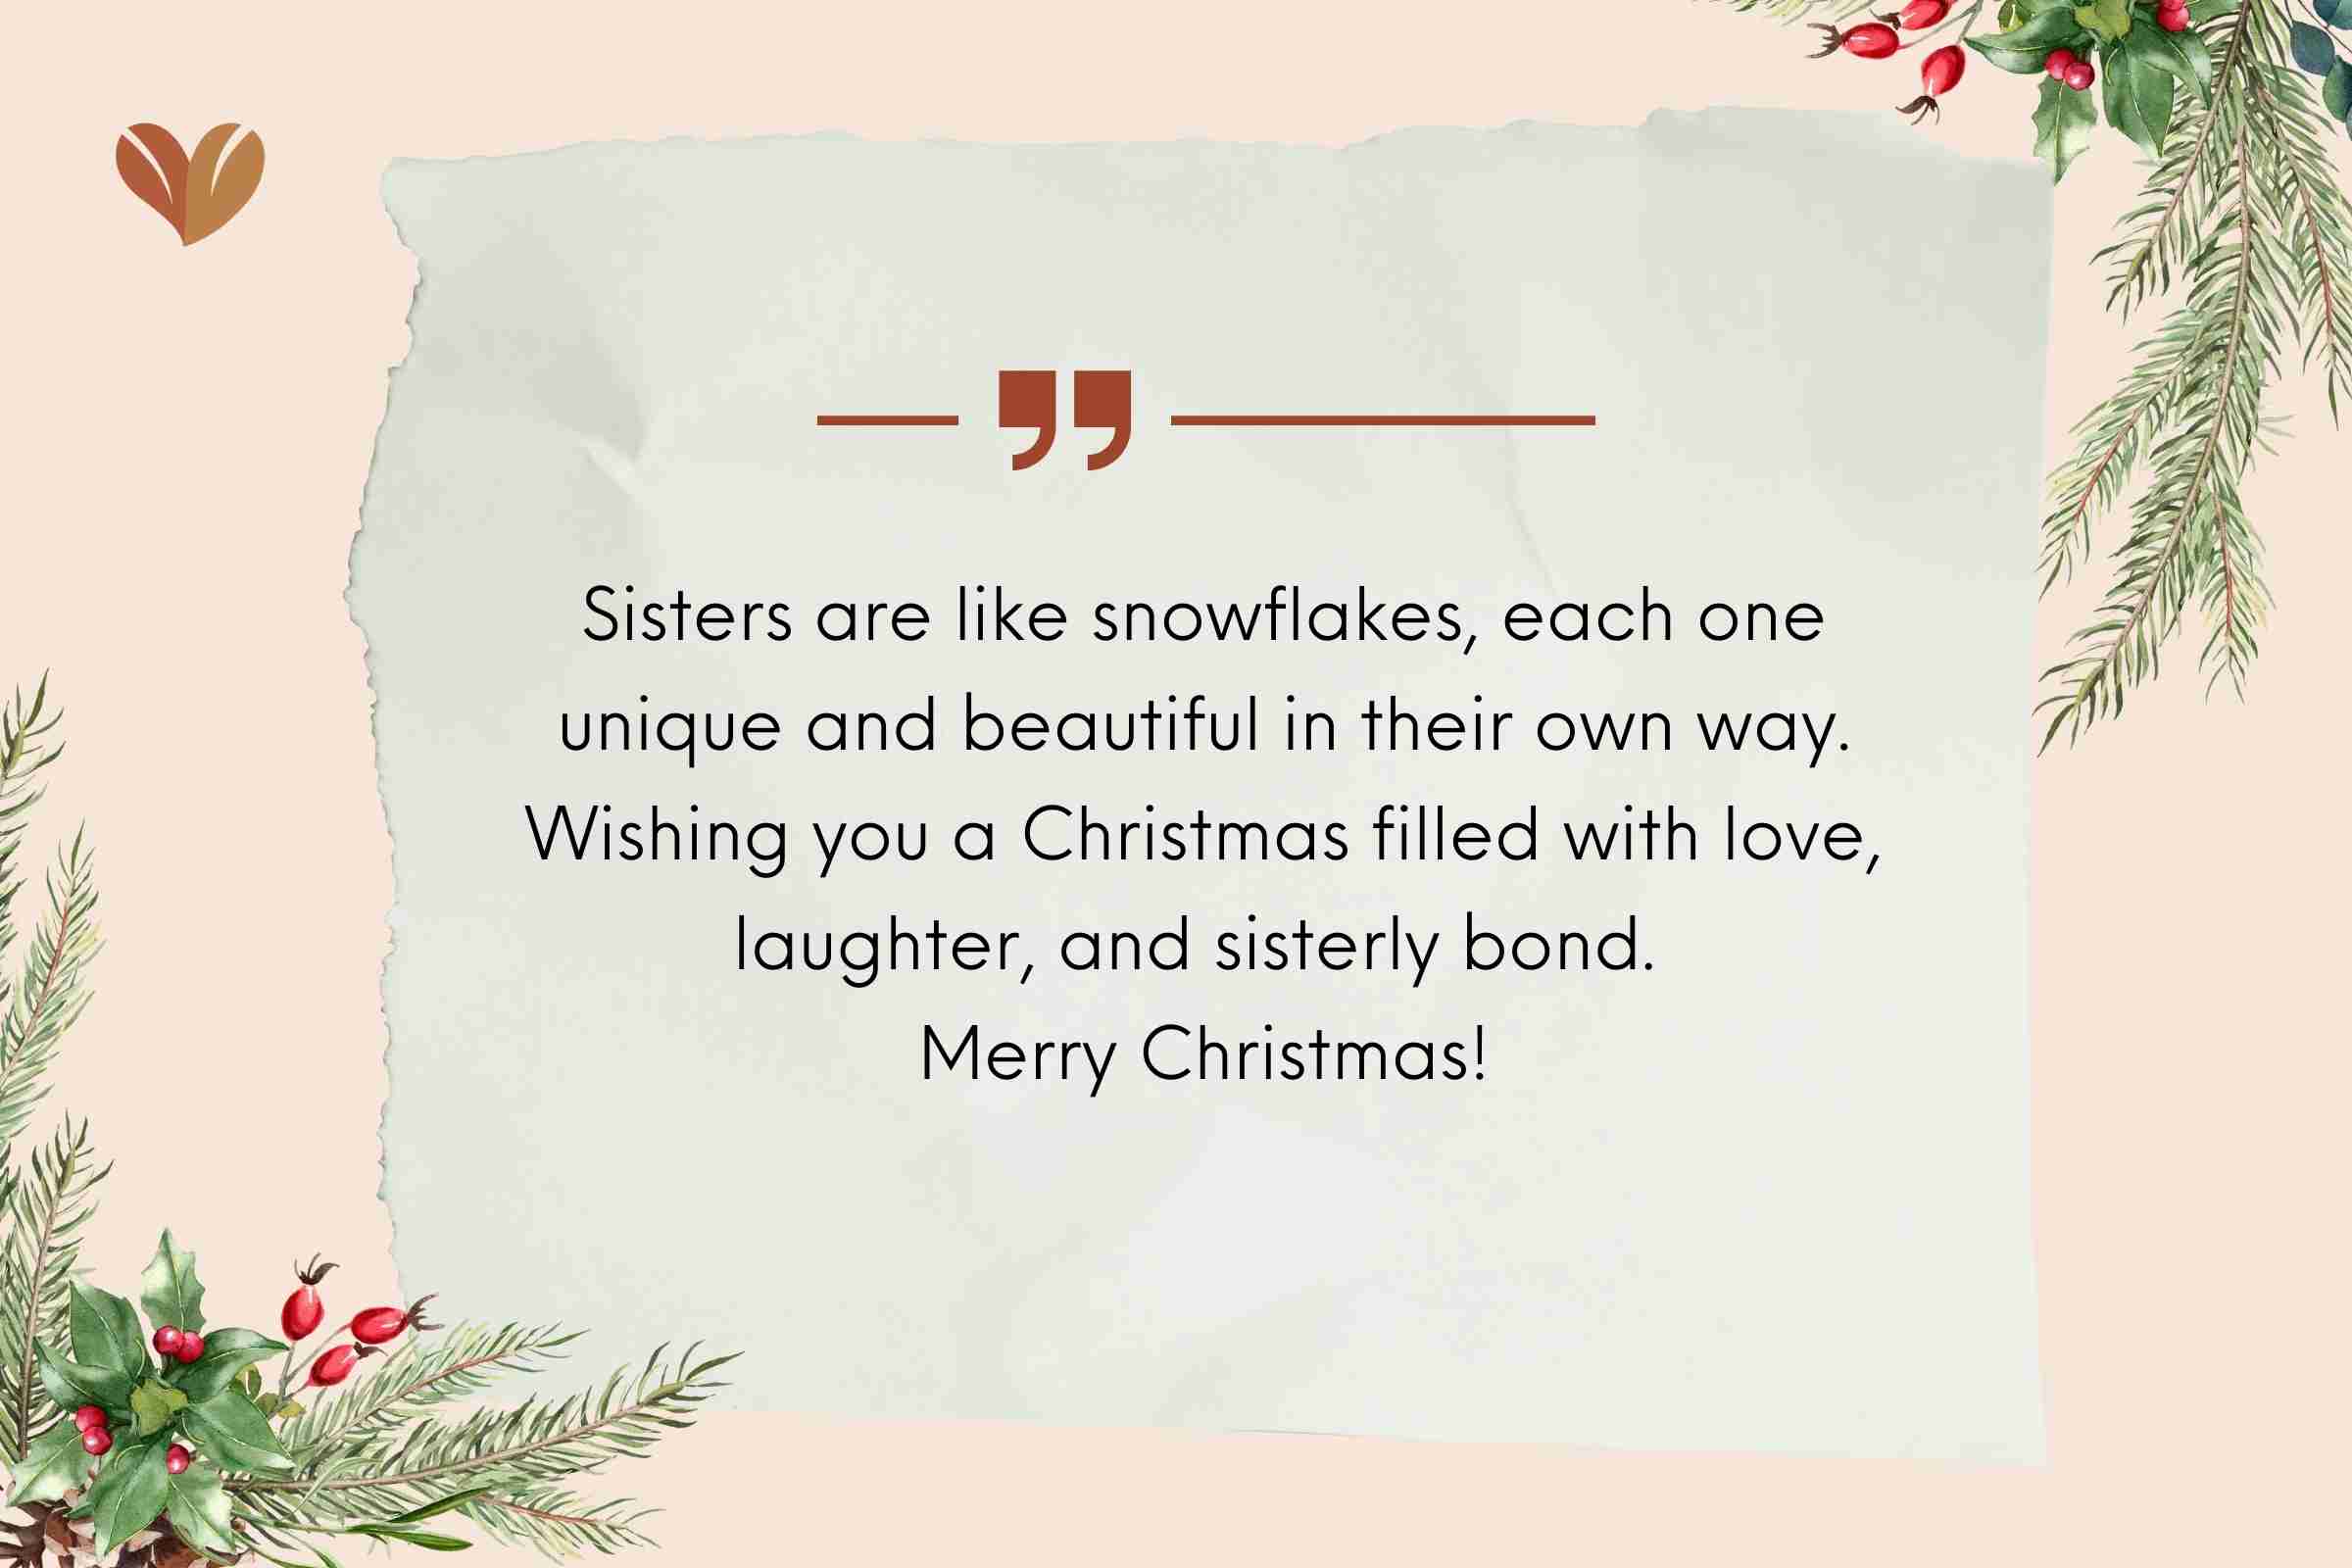 Message of Christmas for Sisters